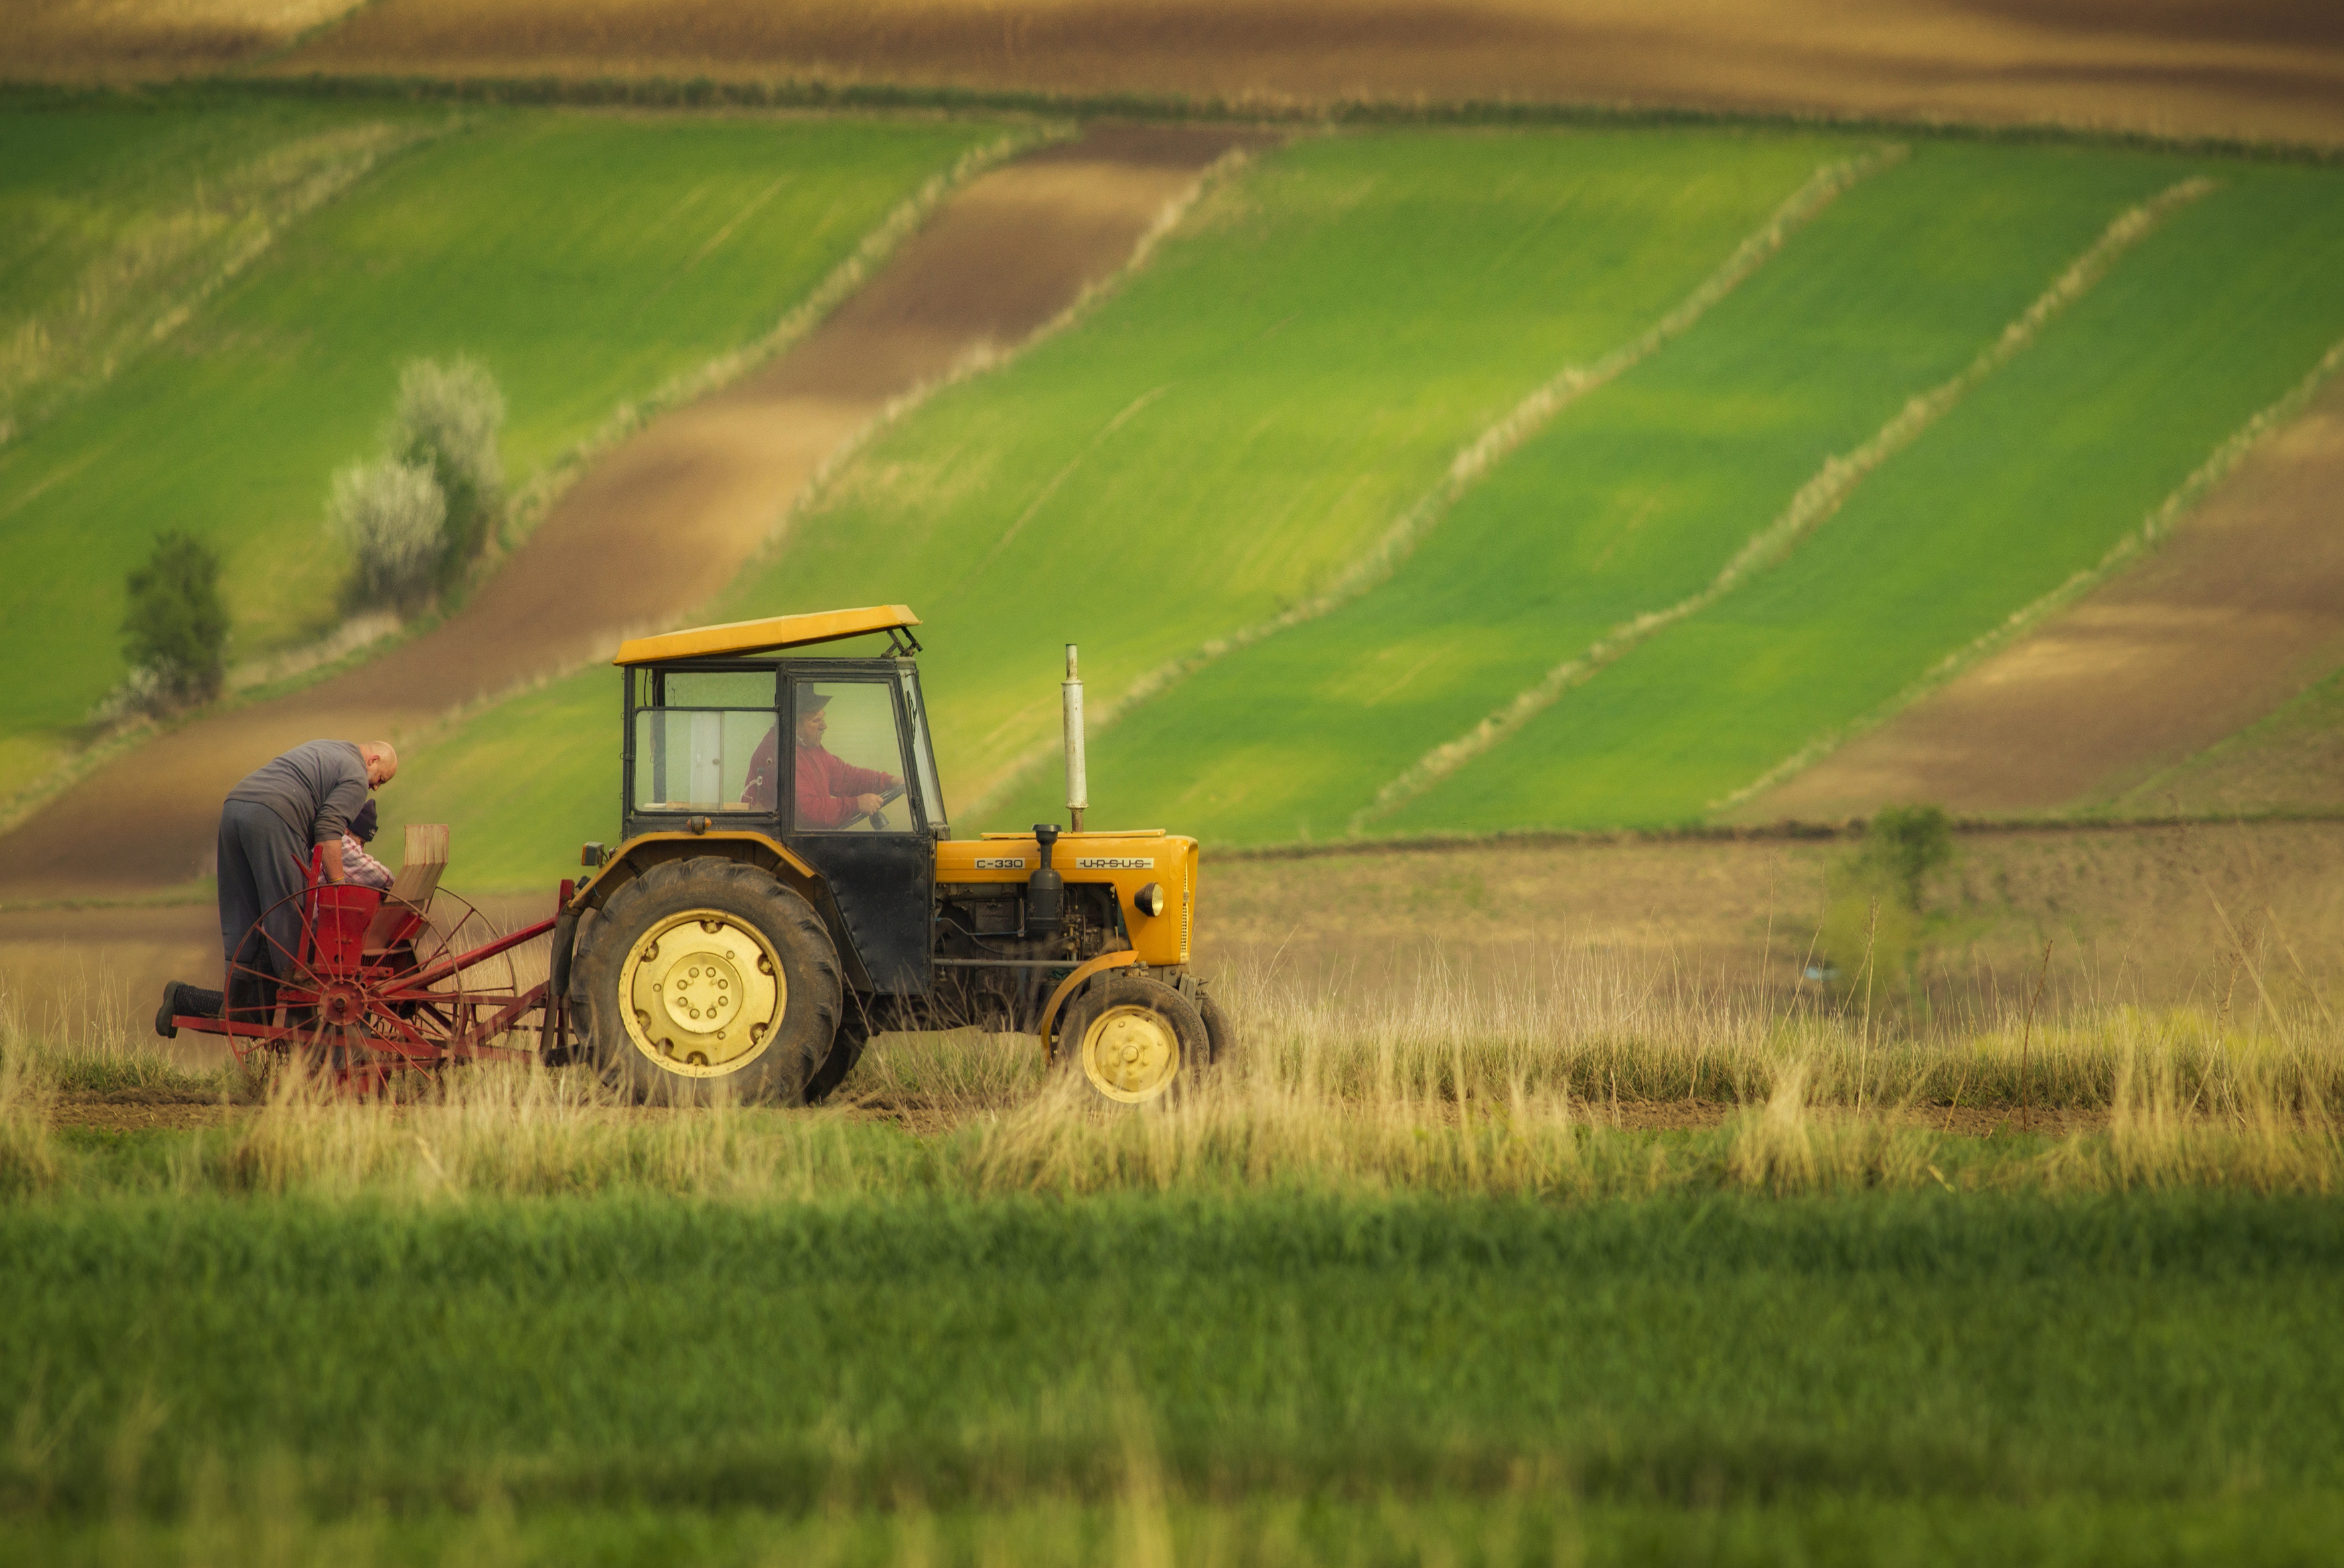 Tractor, Agriculture, Farm, Agricultural, Machinery, Nature, Spring, Rural, Village, Field, Ponidzie, Poland, Damian Cyfka